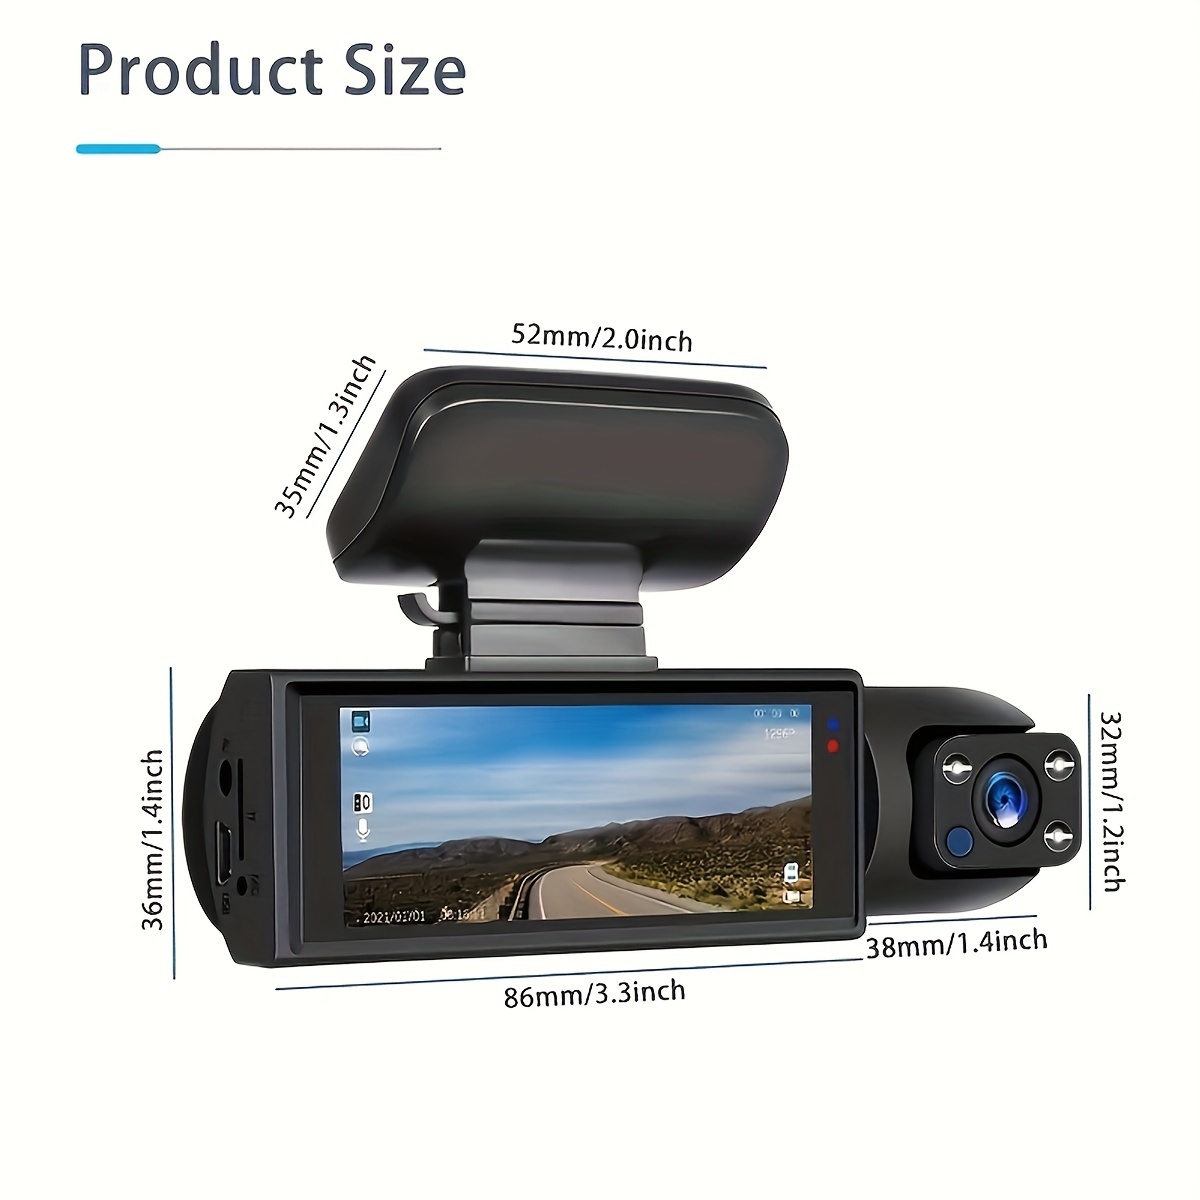 CAMECHO Dual Dash Cam 1080P Front and Inside Dash Camera for Cars 2 Channel  Dashcam, 3.16 IPS Screen, IR Night Vision, Loop Recording, 24hr Parking